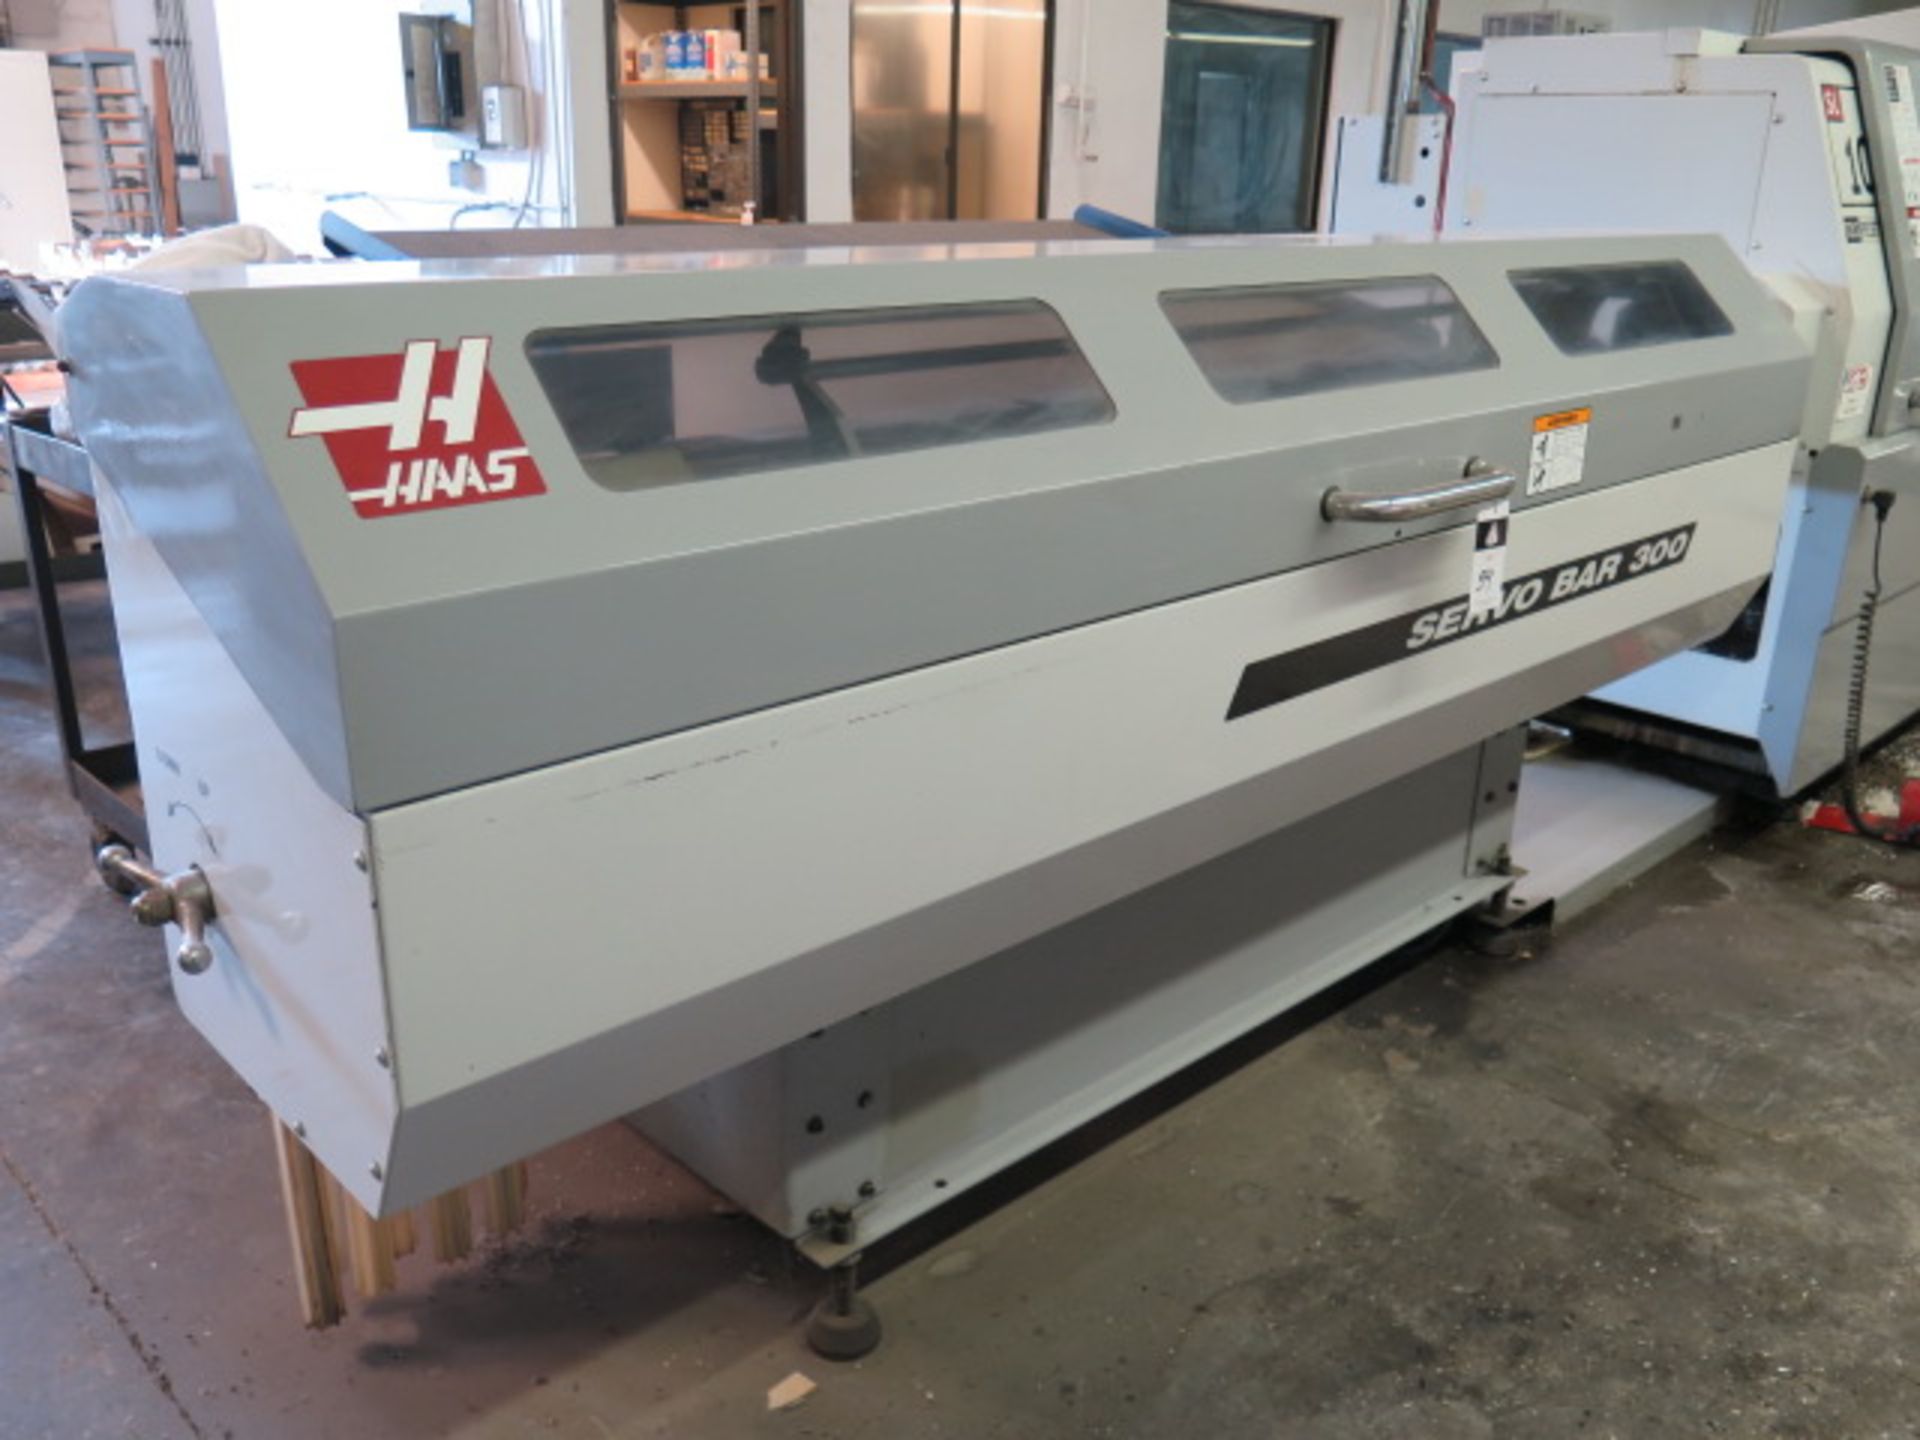 Haas Servobar 300 Automatic Bar Loader / Feeder s/n 92045 w/ Spindle Liner Set (SOLD AS-IS - NO WARR - Image 3 of 11